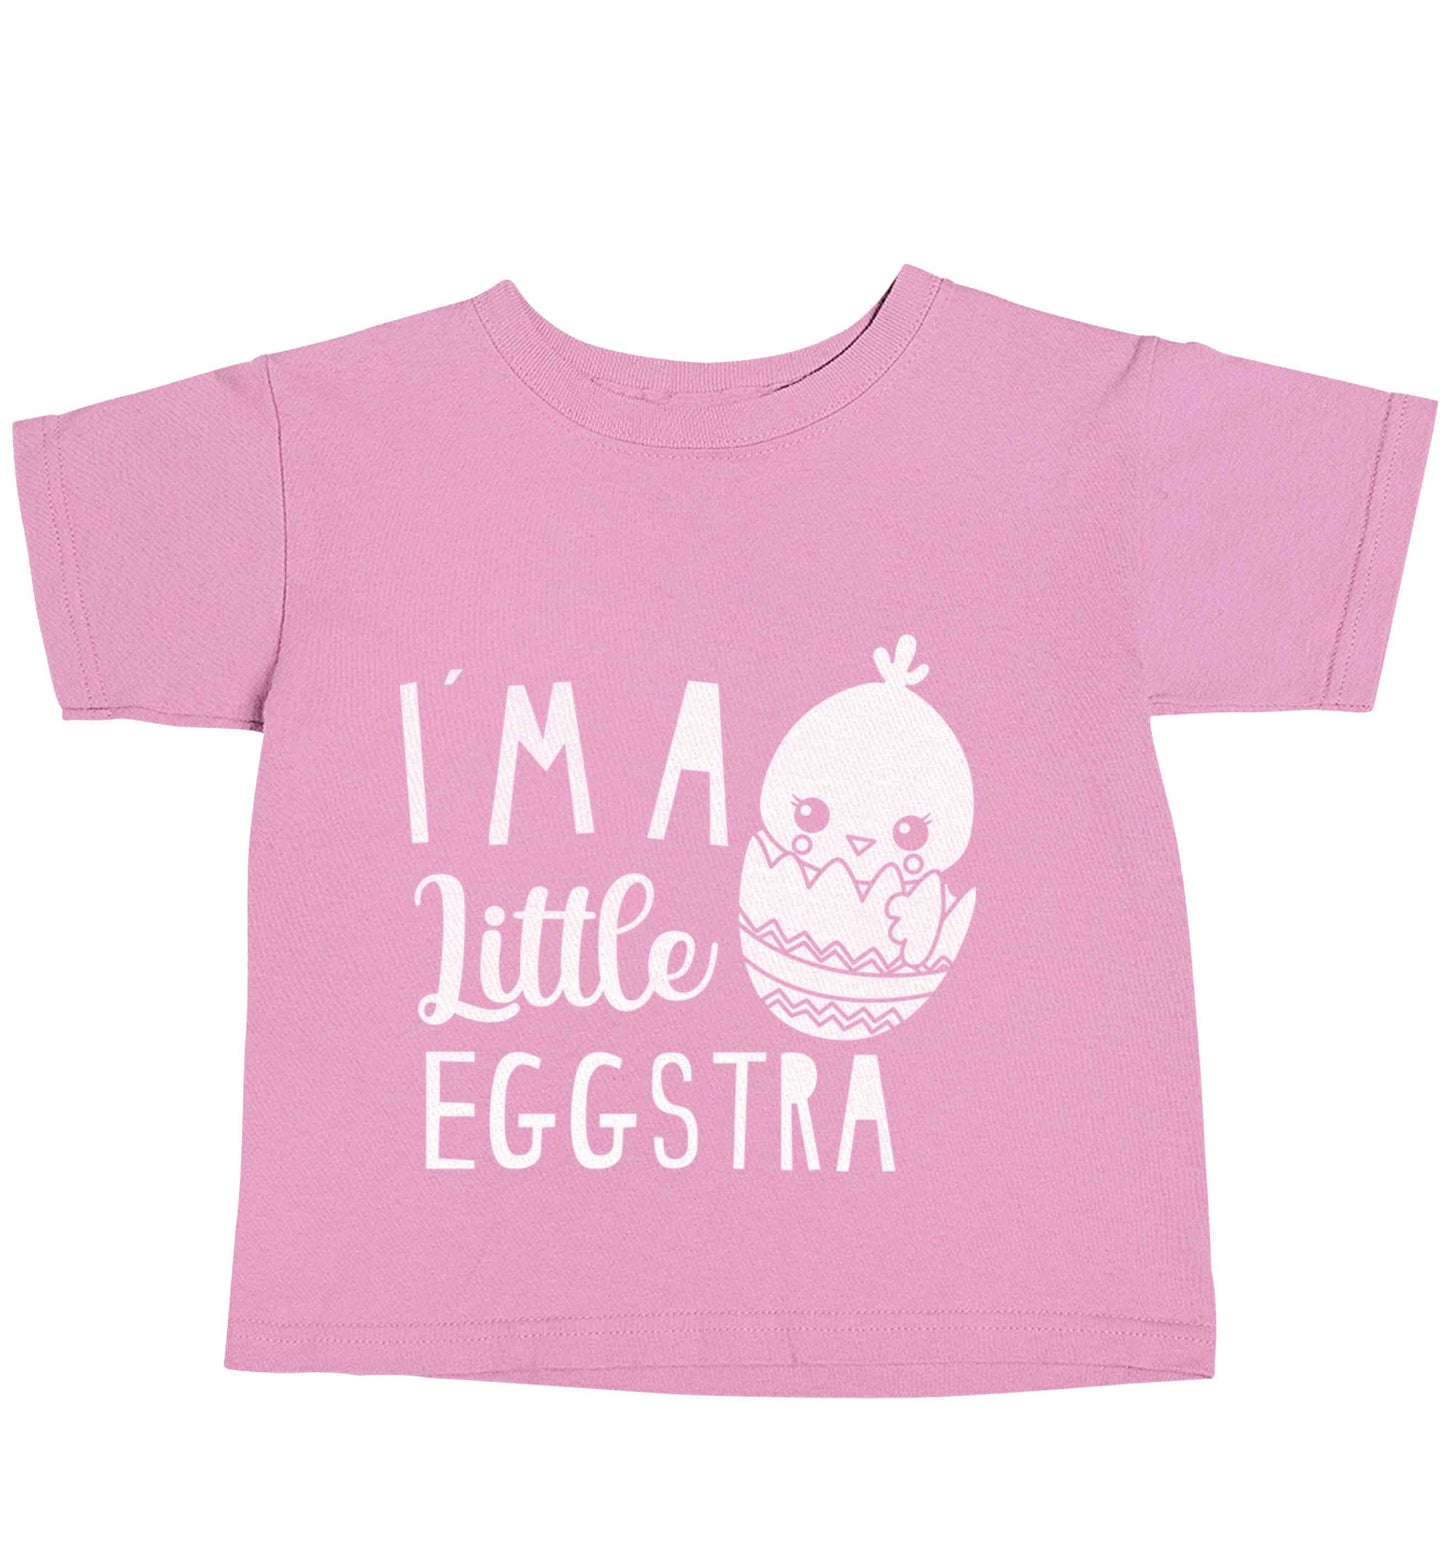 I'm a little eggstra light pink baby toddler Tshirt 2 Years